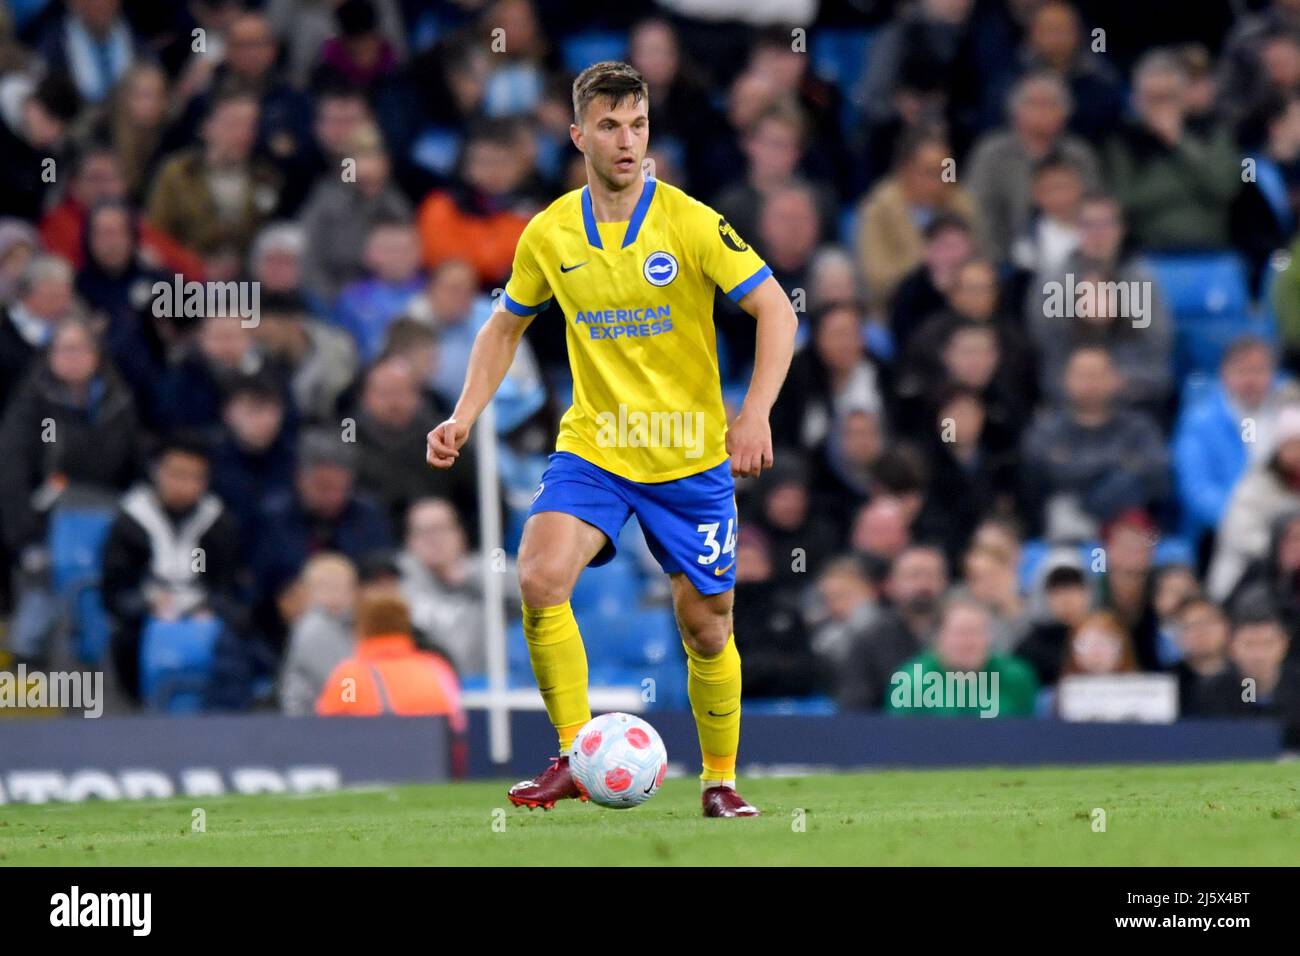 Brighton and Hove Albion's Joel Veltman. Picture date: Thursday April 21, 2022. Photo credit should read:   Anthony Devlin/Alamy Live News/Alamy Live News Stock Photo